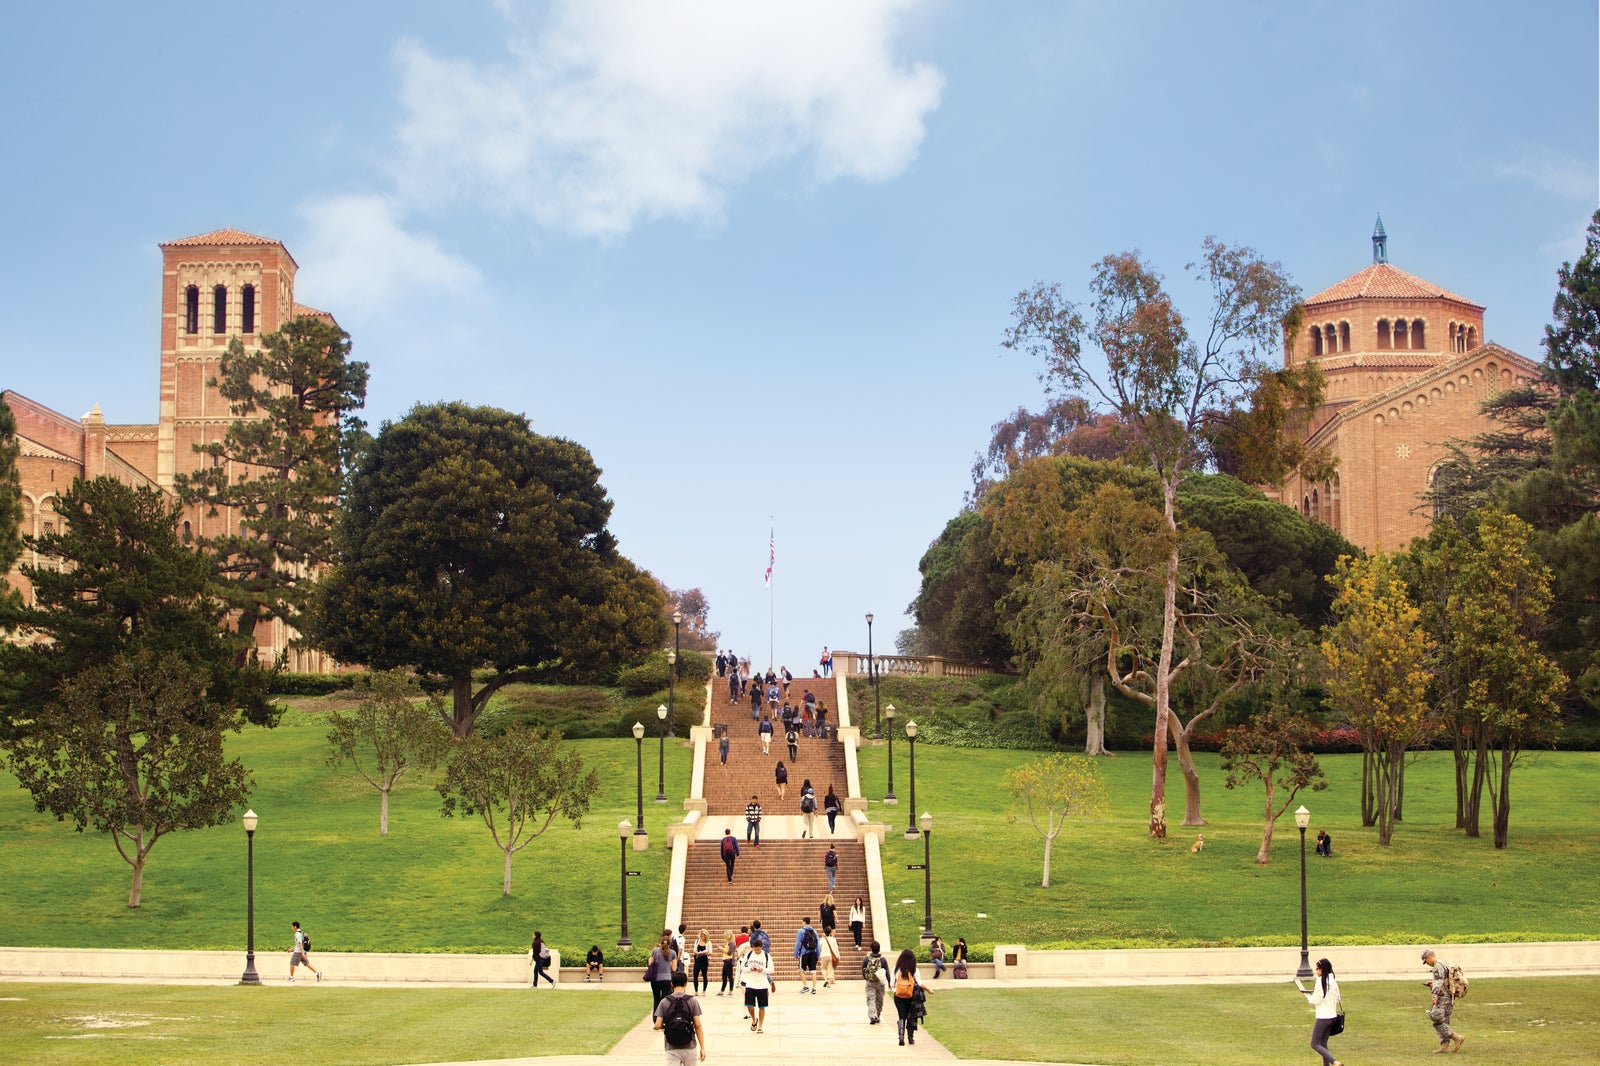 The towers of Royce Hall and the octagonal dome of Powell Library are visible at the top of Janss Steps